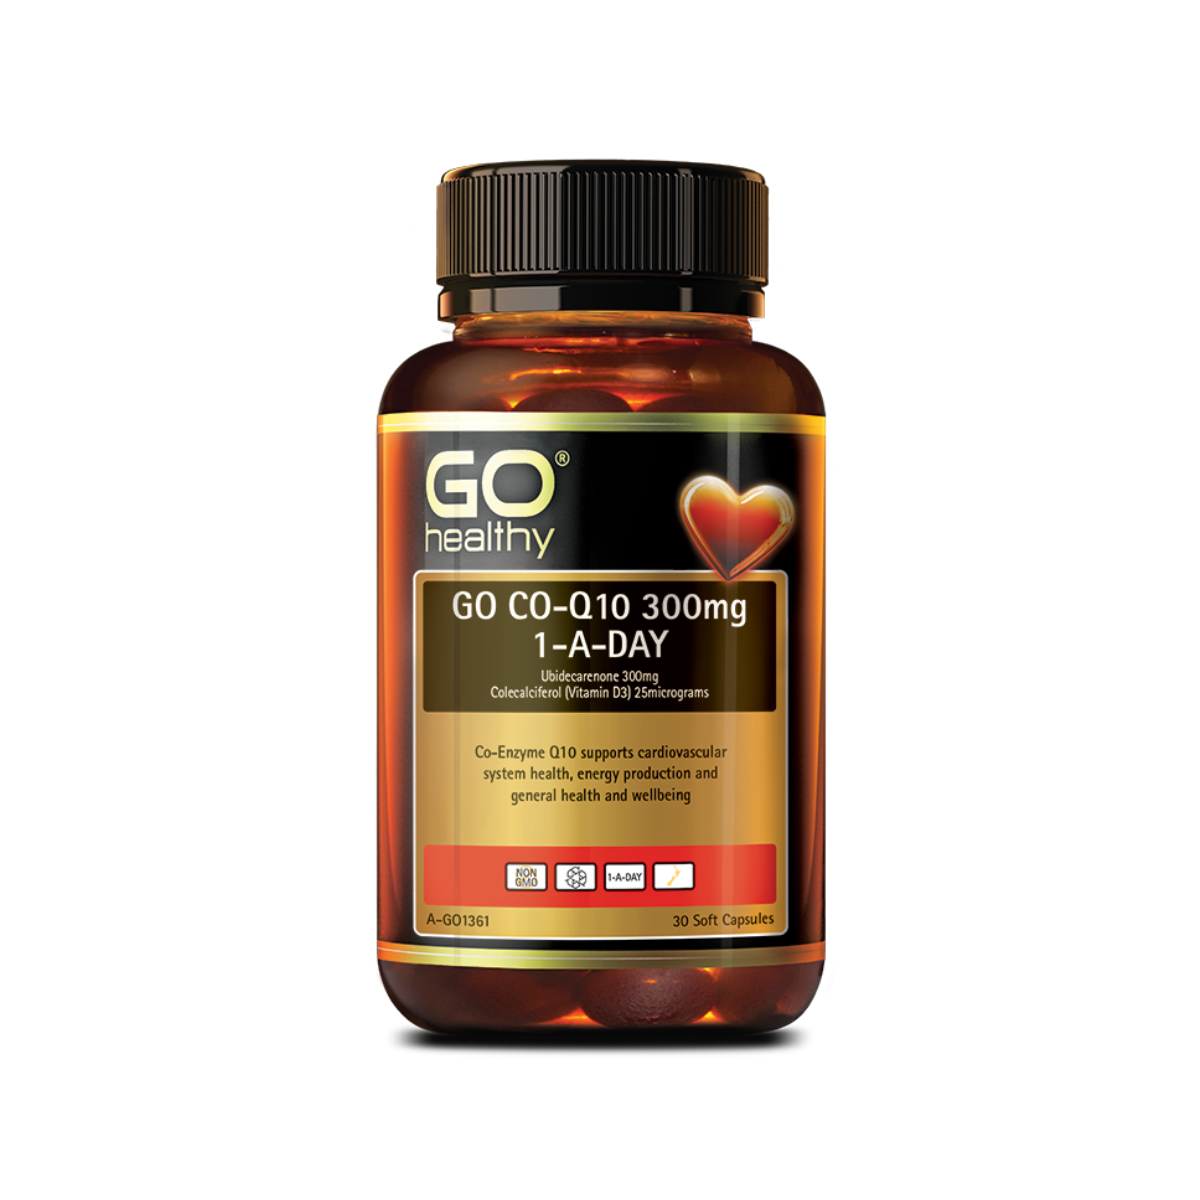 Go Healthy Co-Q10 300mg 1-A-DAY 90 Capsules